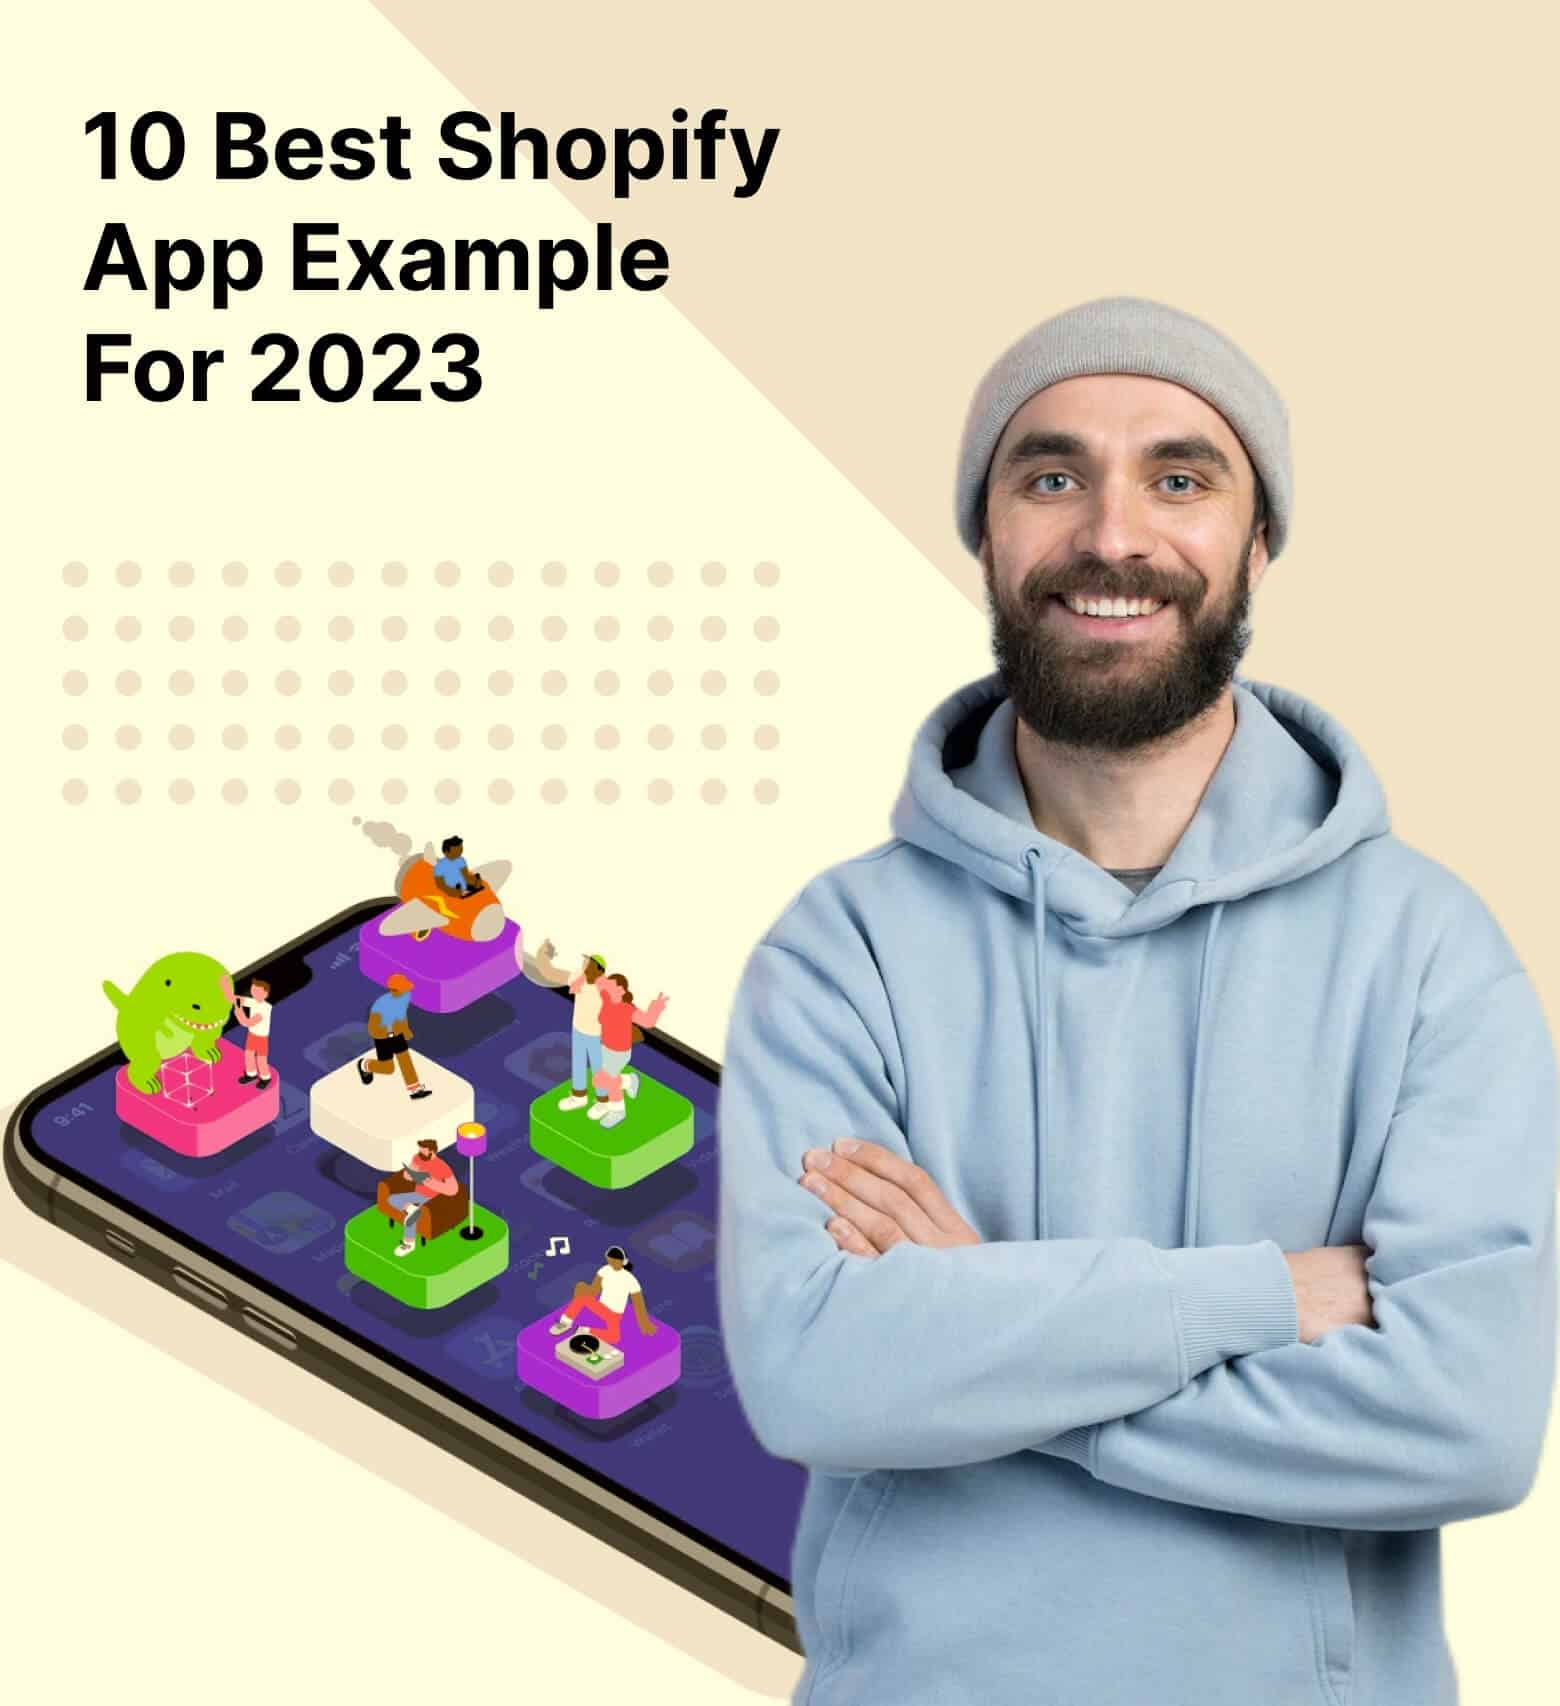 10 Best Shopify App Example